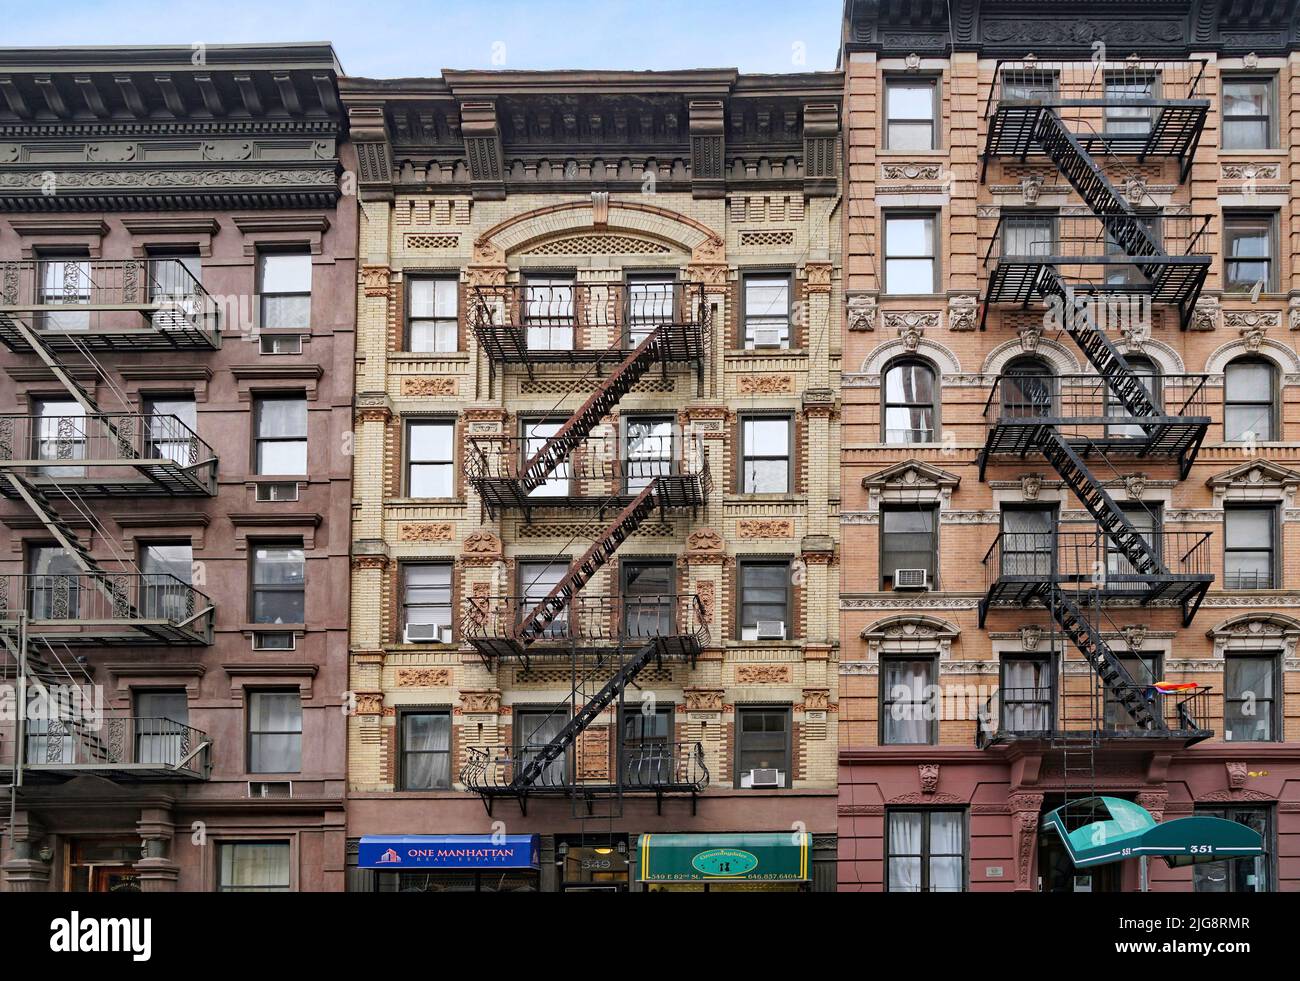 Old fashioned Manhattan apartment building facade with external fire escape ladders and stores at ground level Stock Photo